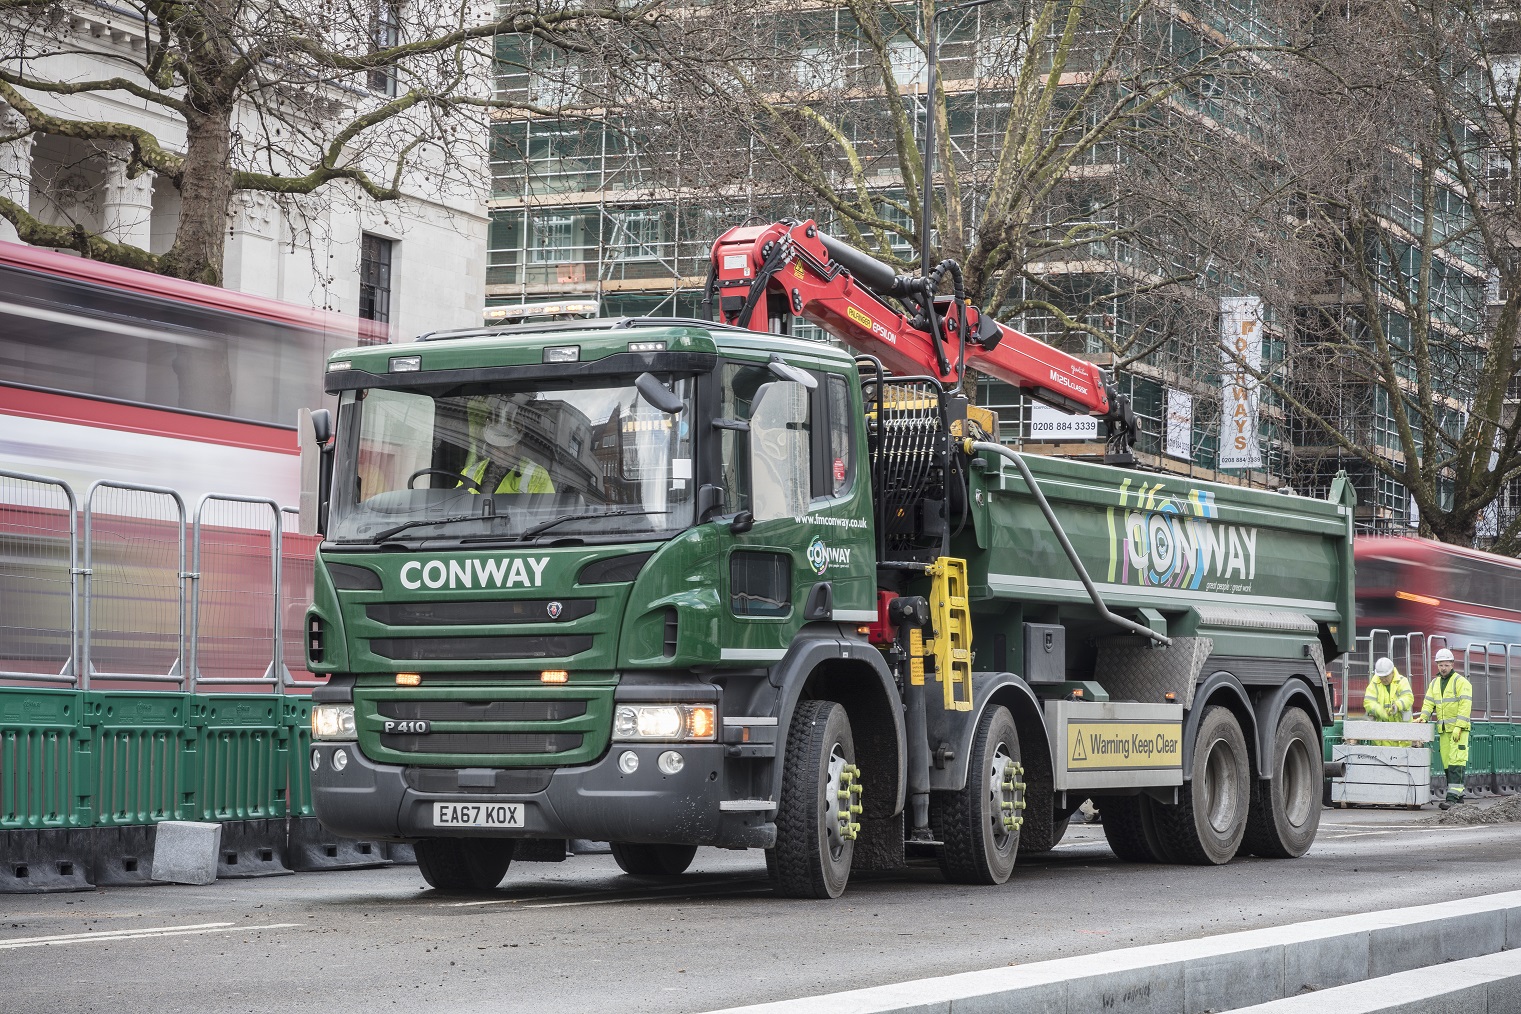 FM Conway leads on air quality standards with 7m GBP fleet investment